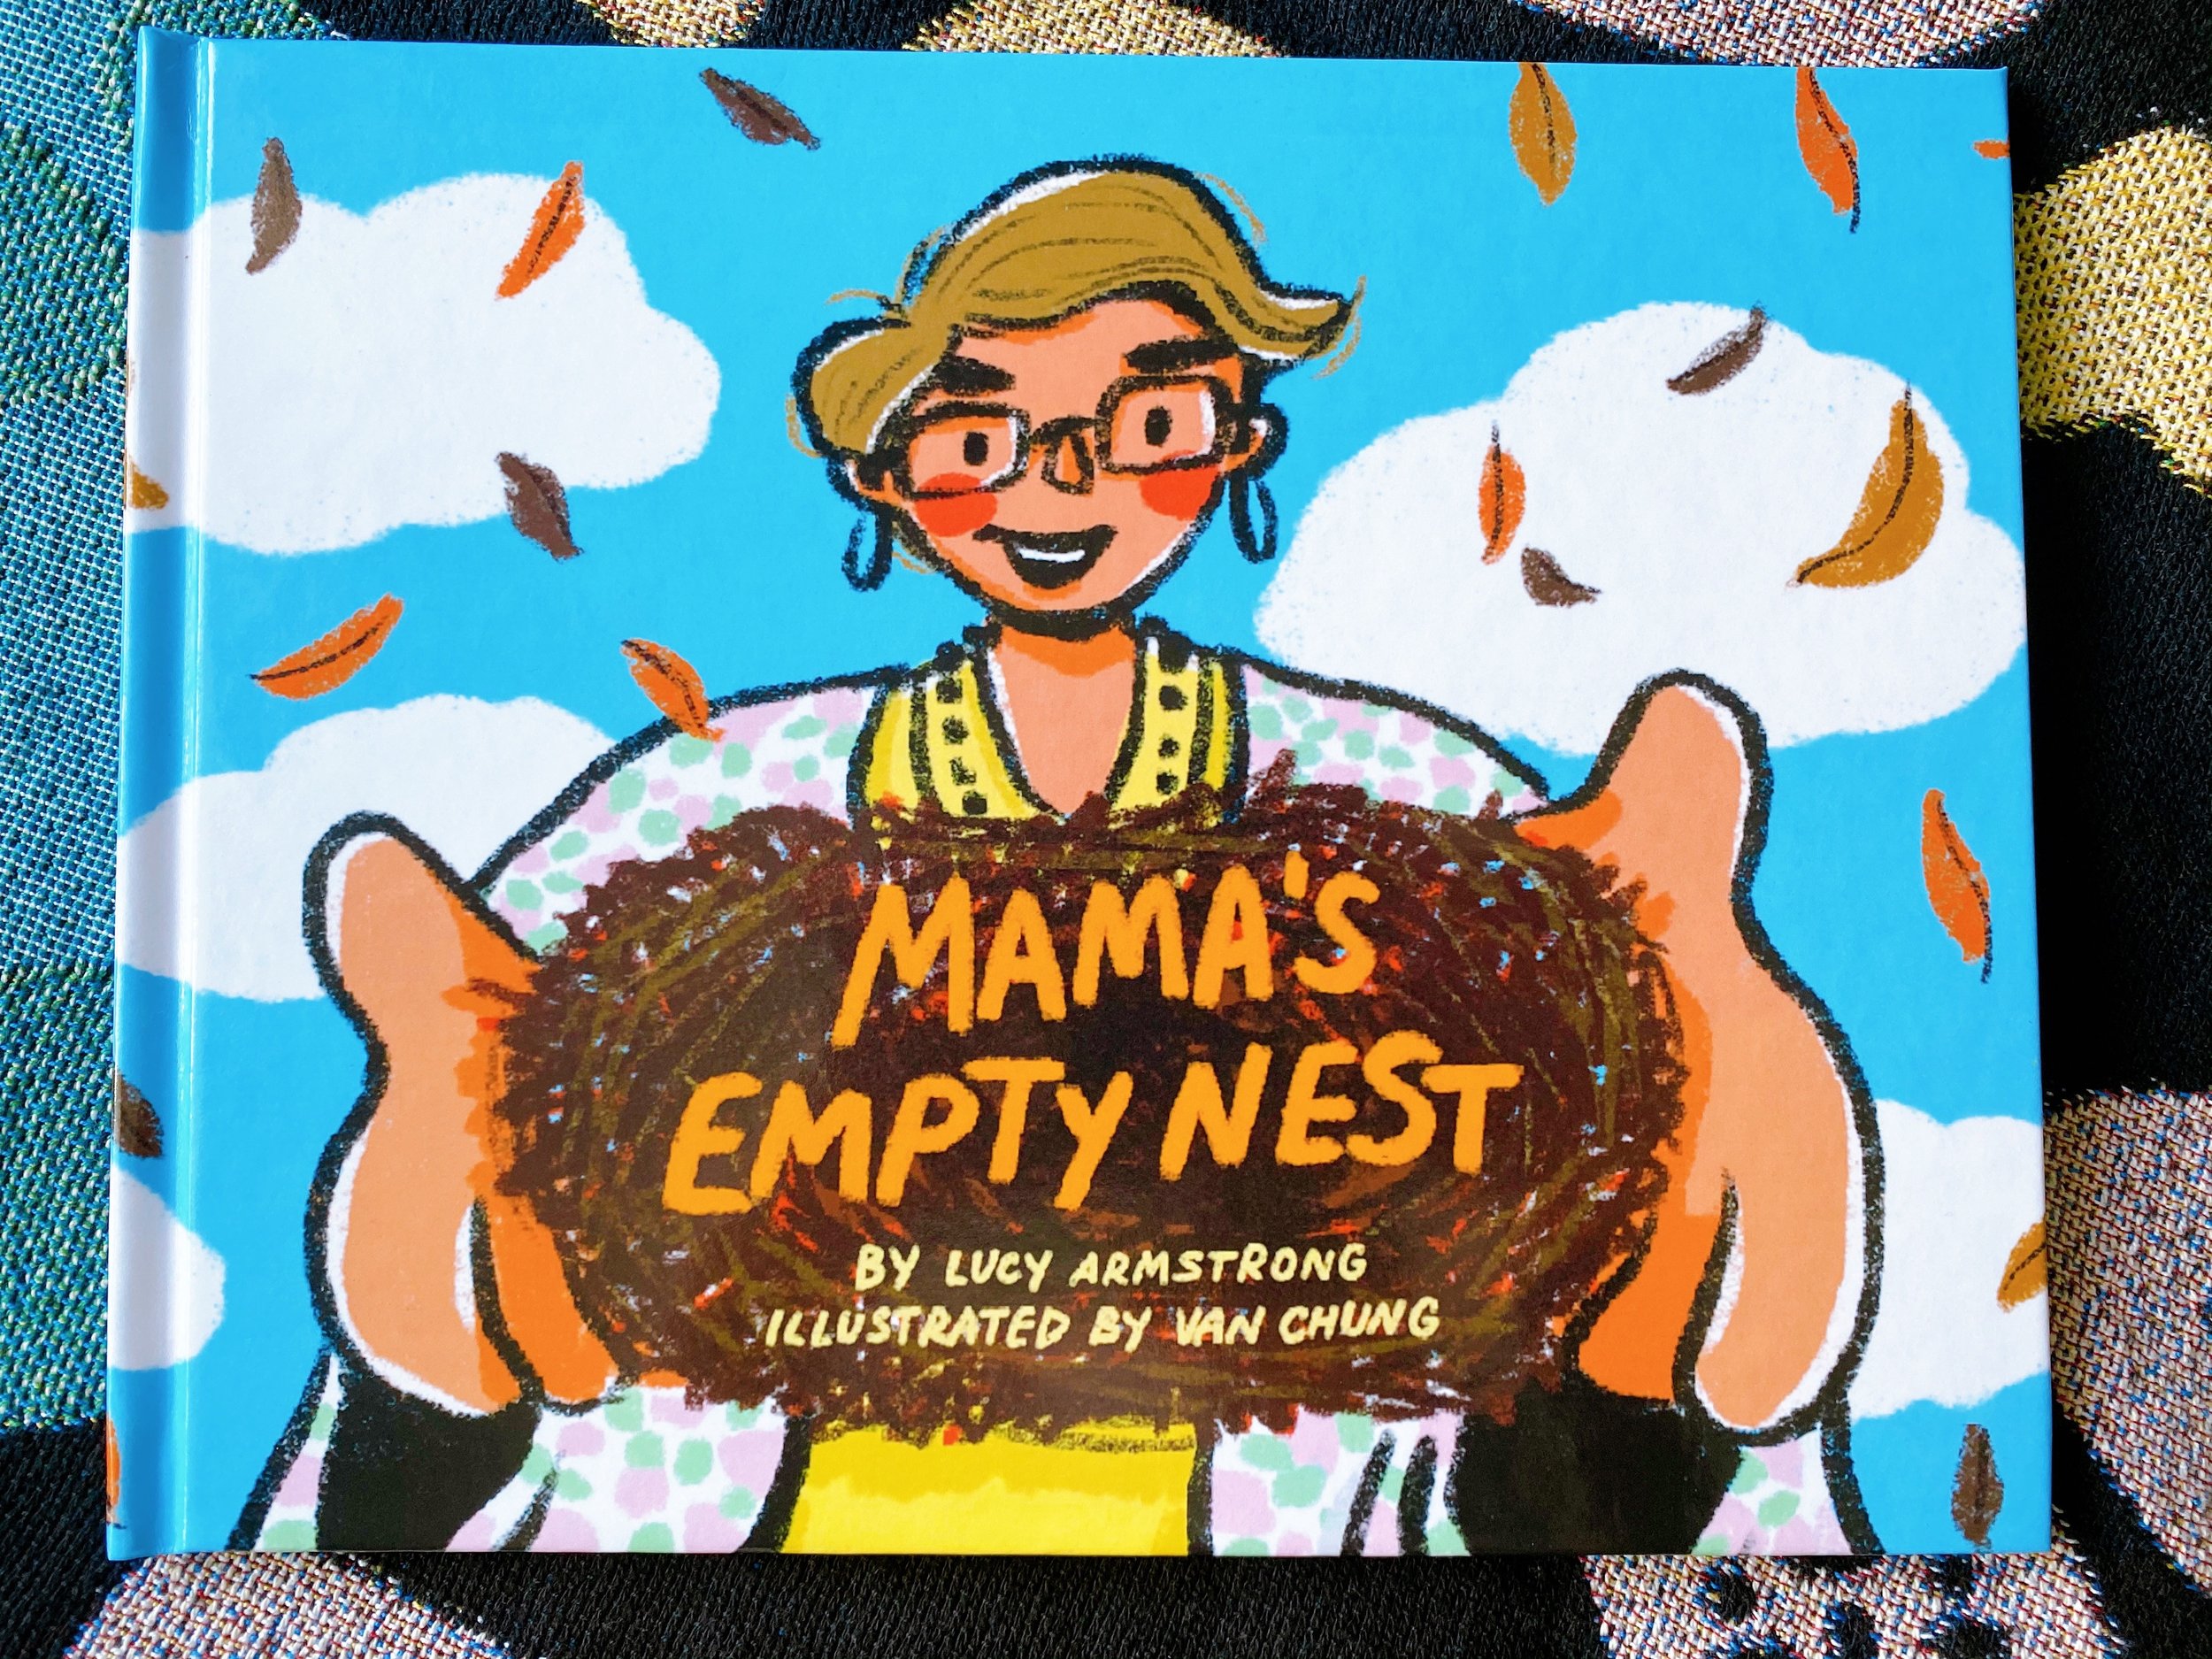 Mama's Empty Nest by Lucy Armstrong